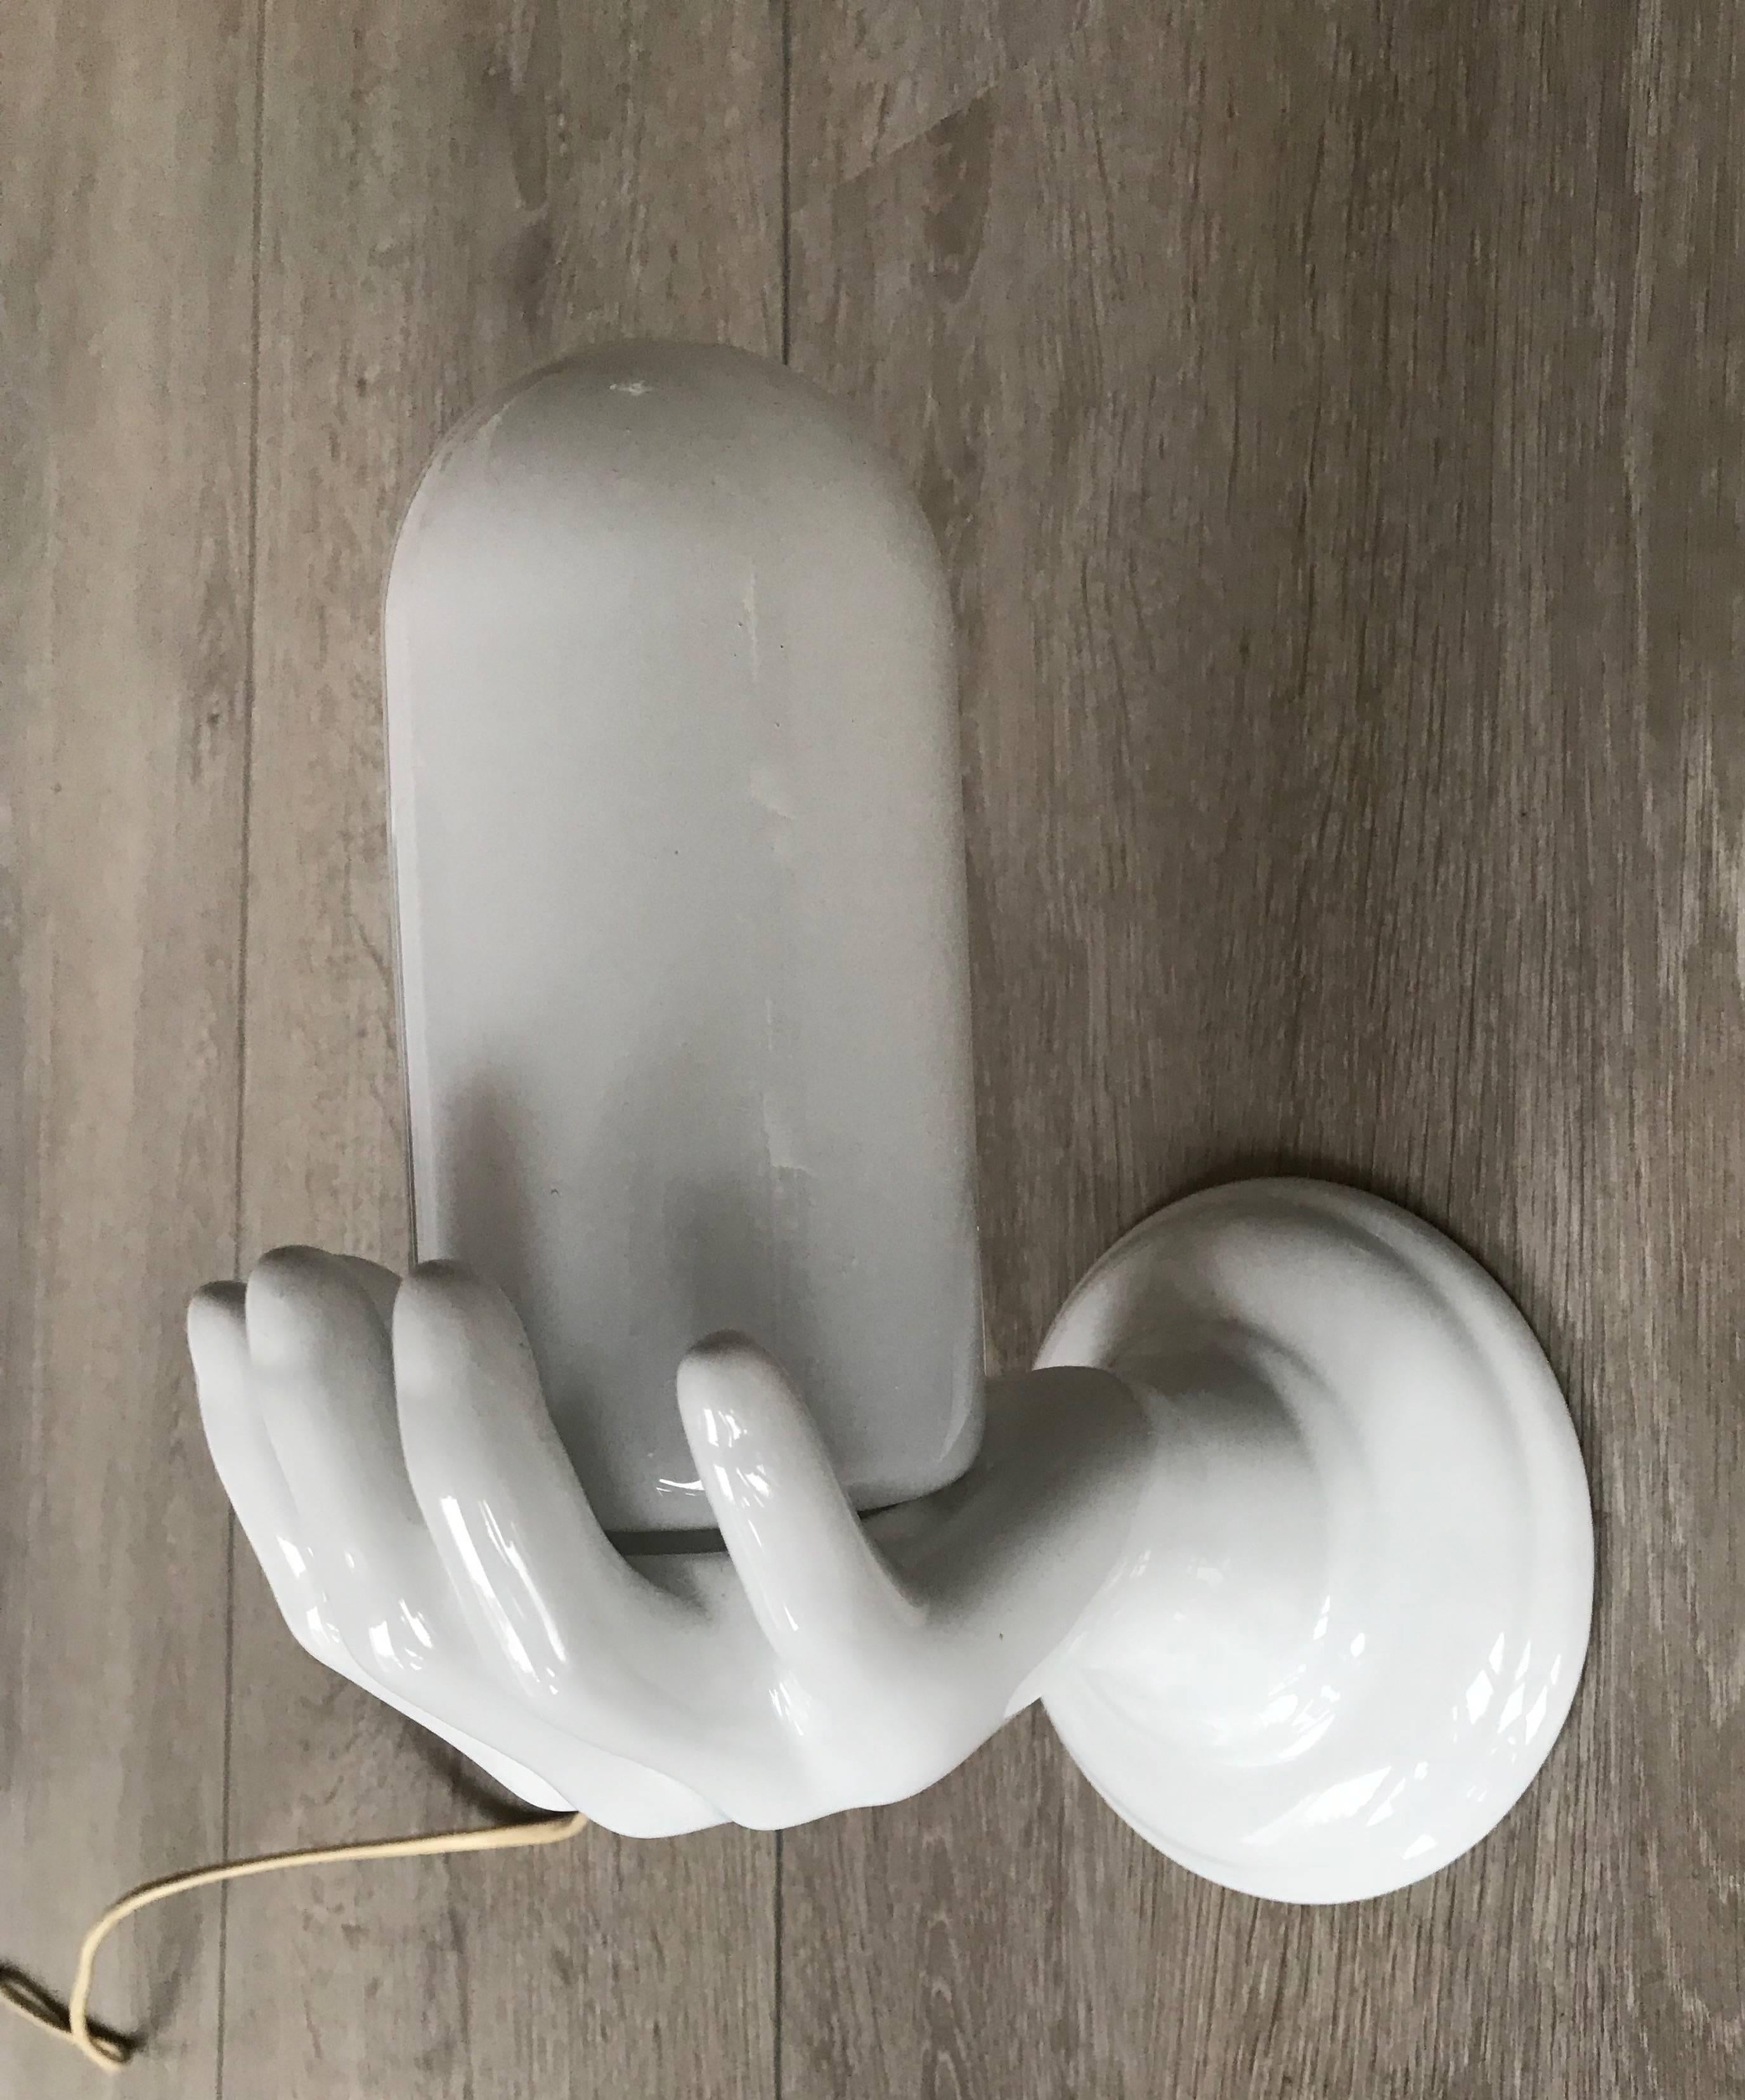 Italian 1970s Glazed White Ceramic Right Hand Holding a Glass Wall Sconce or Wall Light